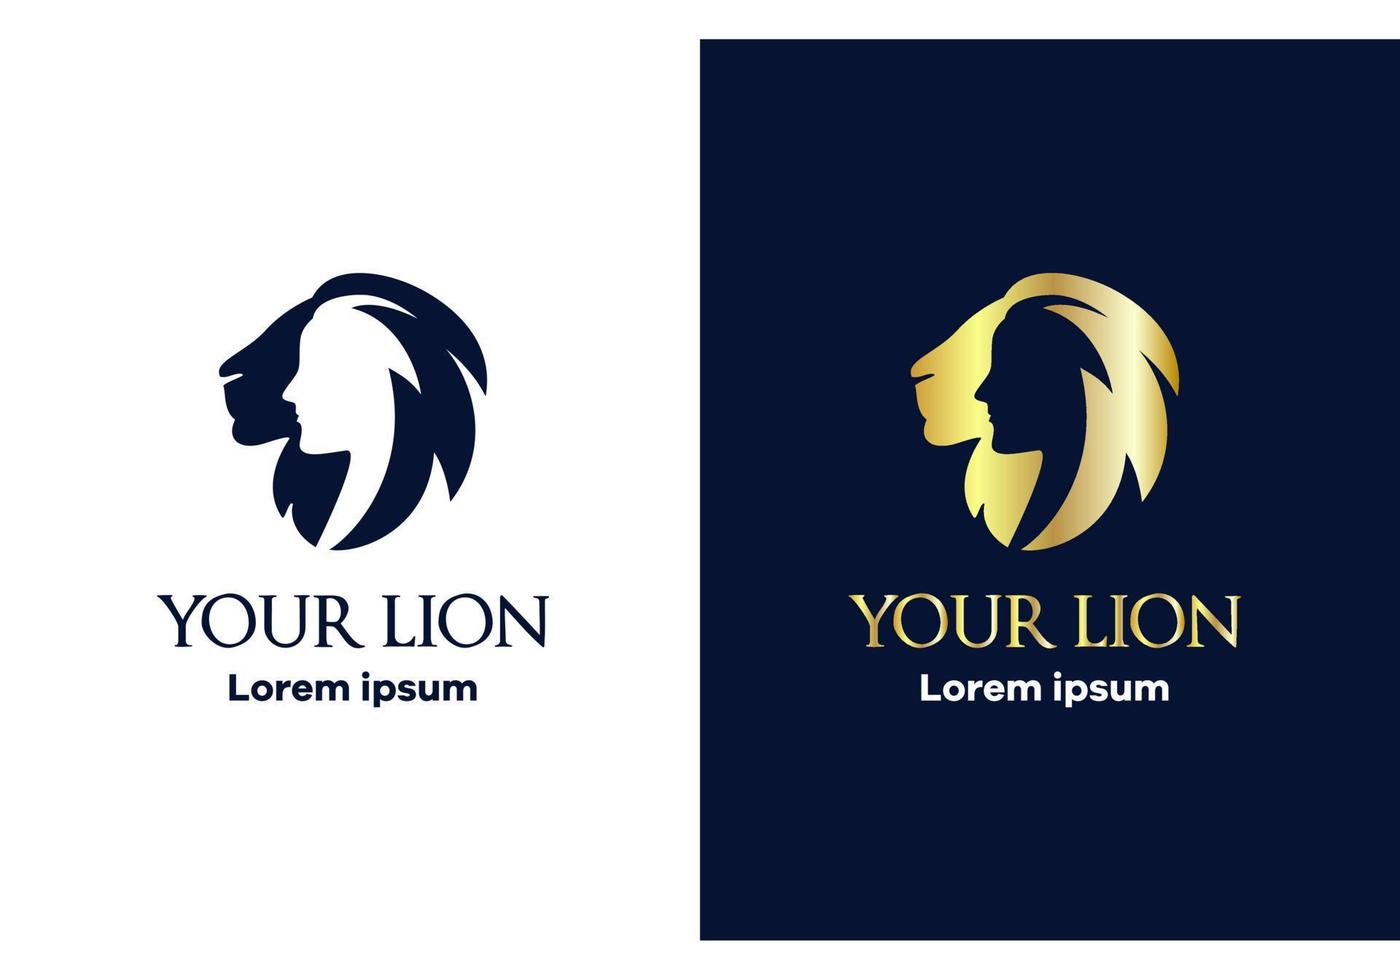 The logo is in the form of silhouettes of a lion and a man. Personal brand vector